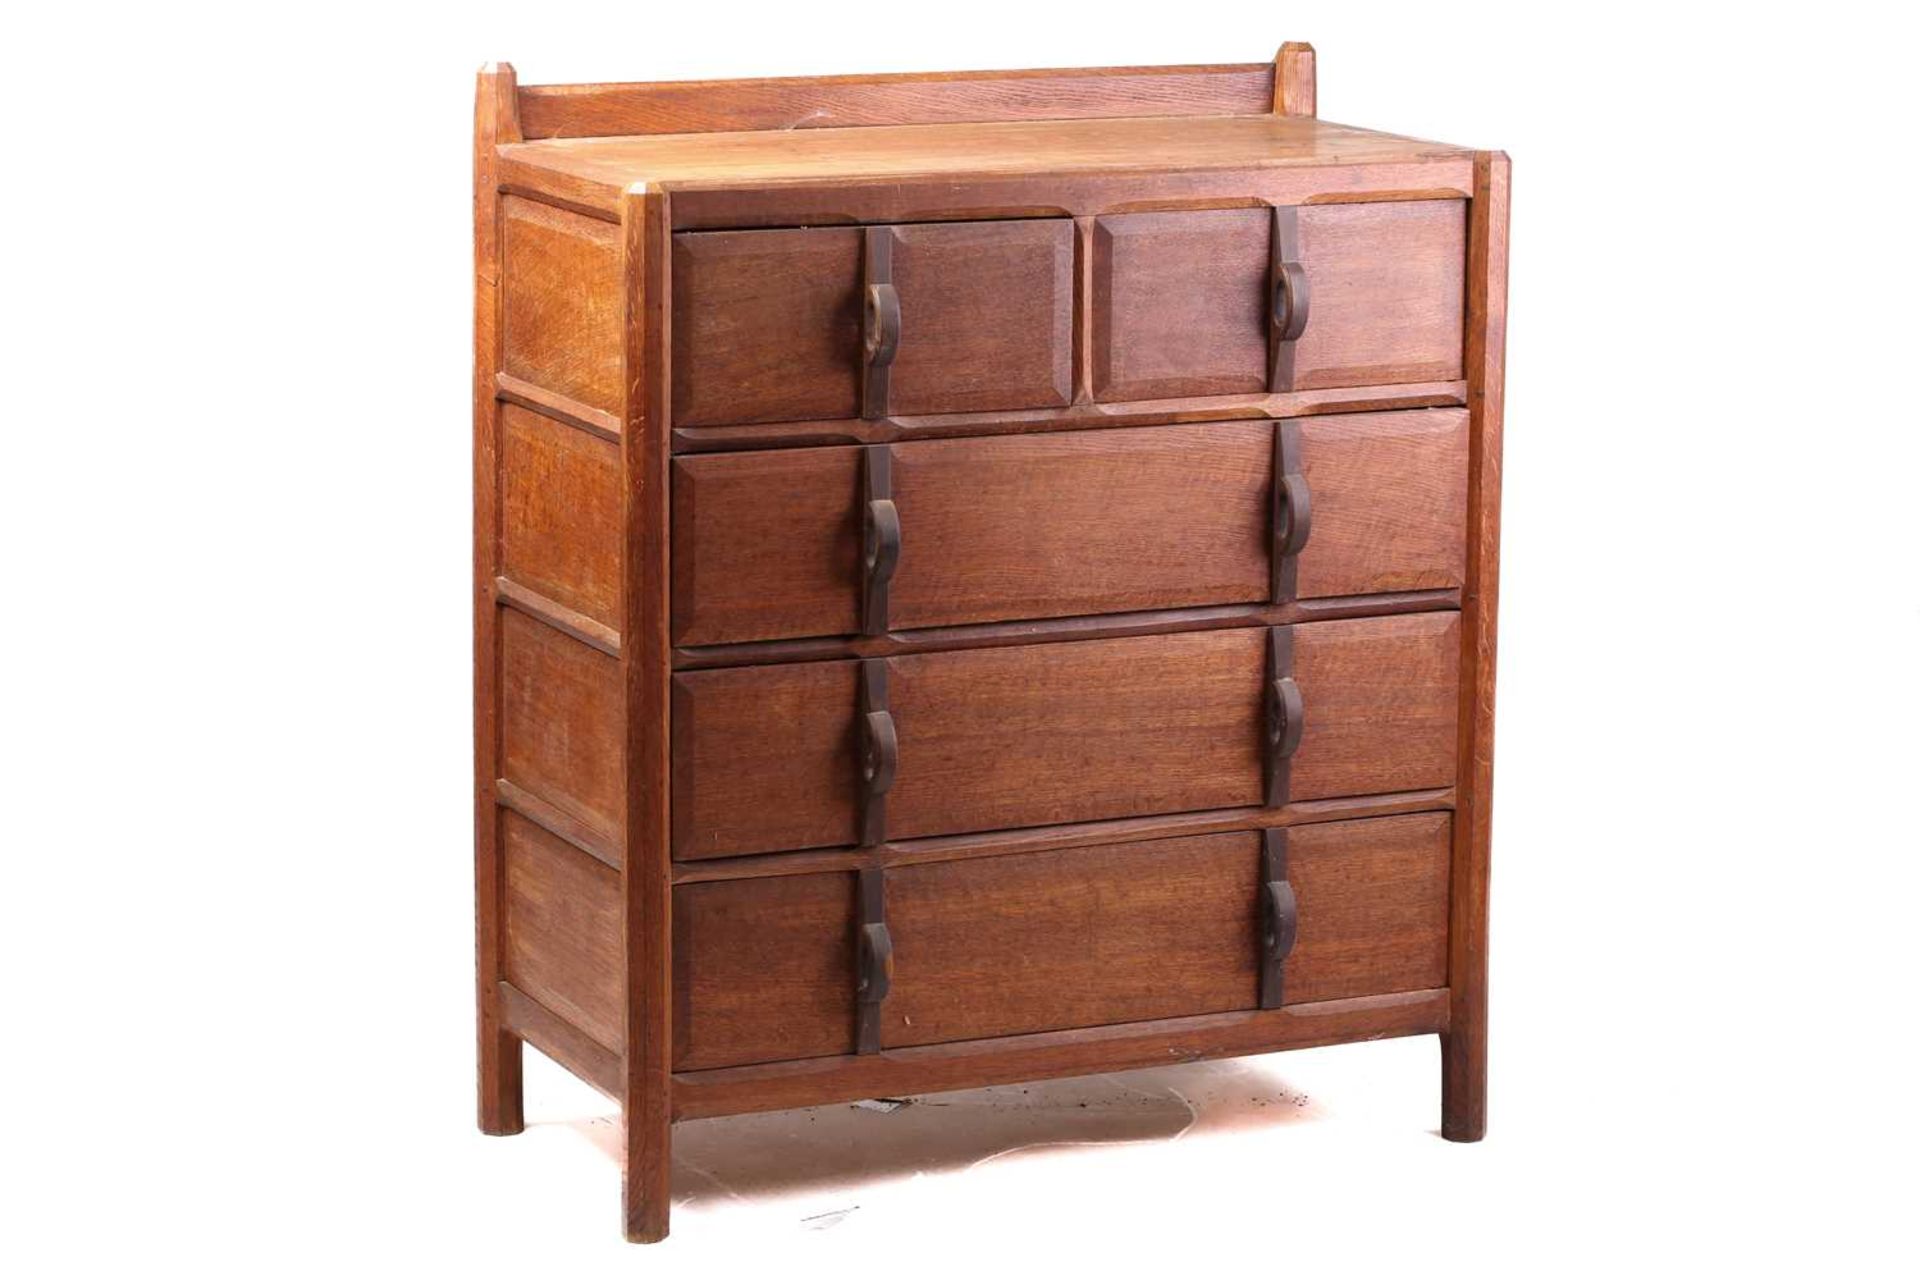 A Gordon Russell bedroom suite in English brown oak, c.1925, comprising: a dressing table with - Image 10 of 26